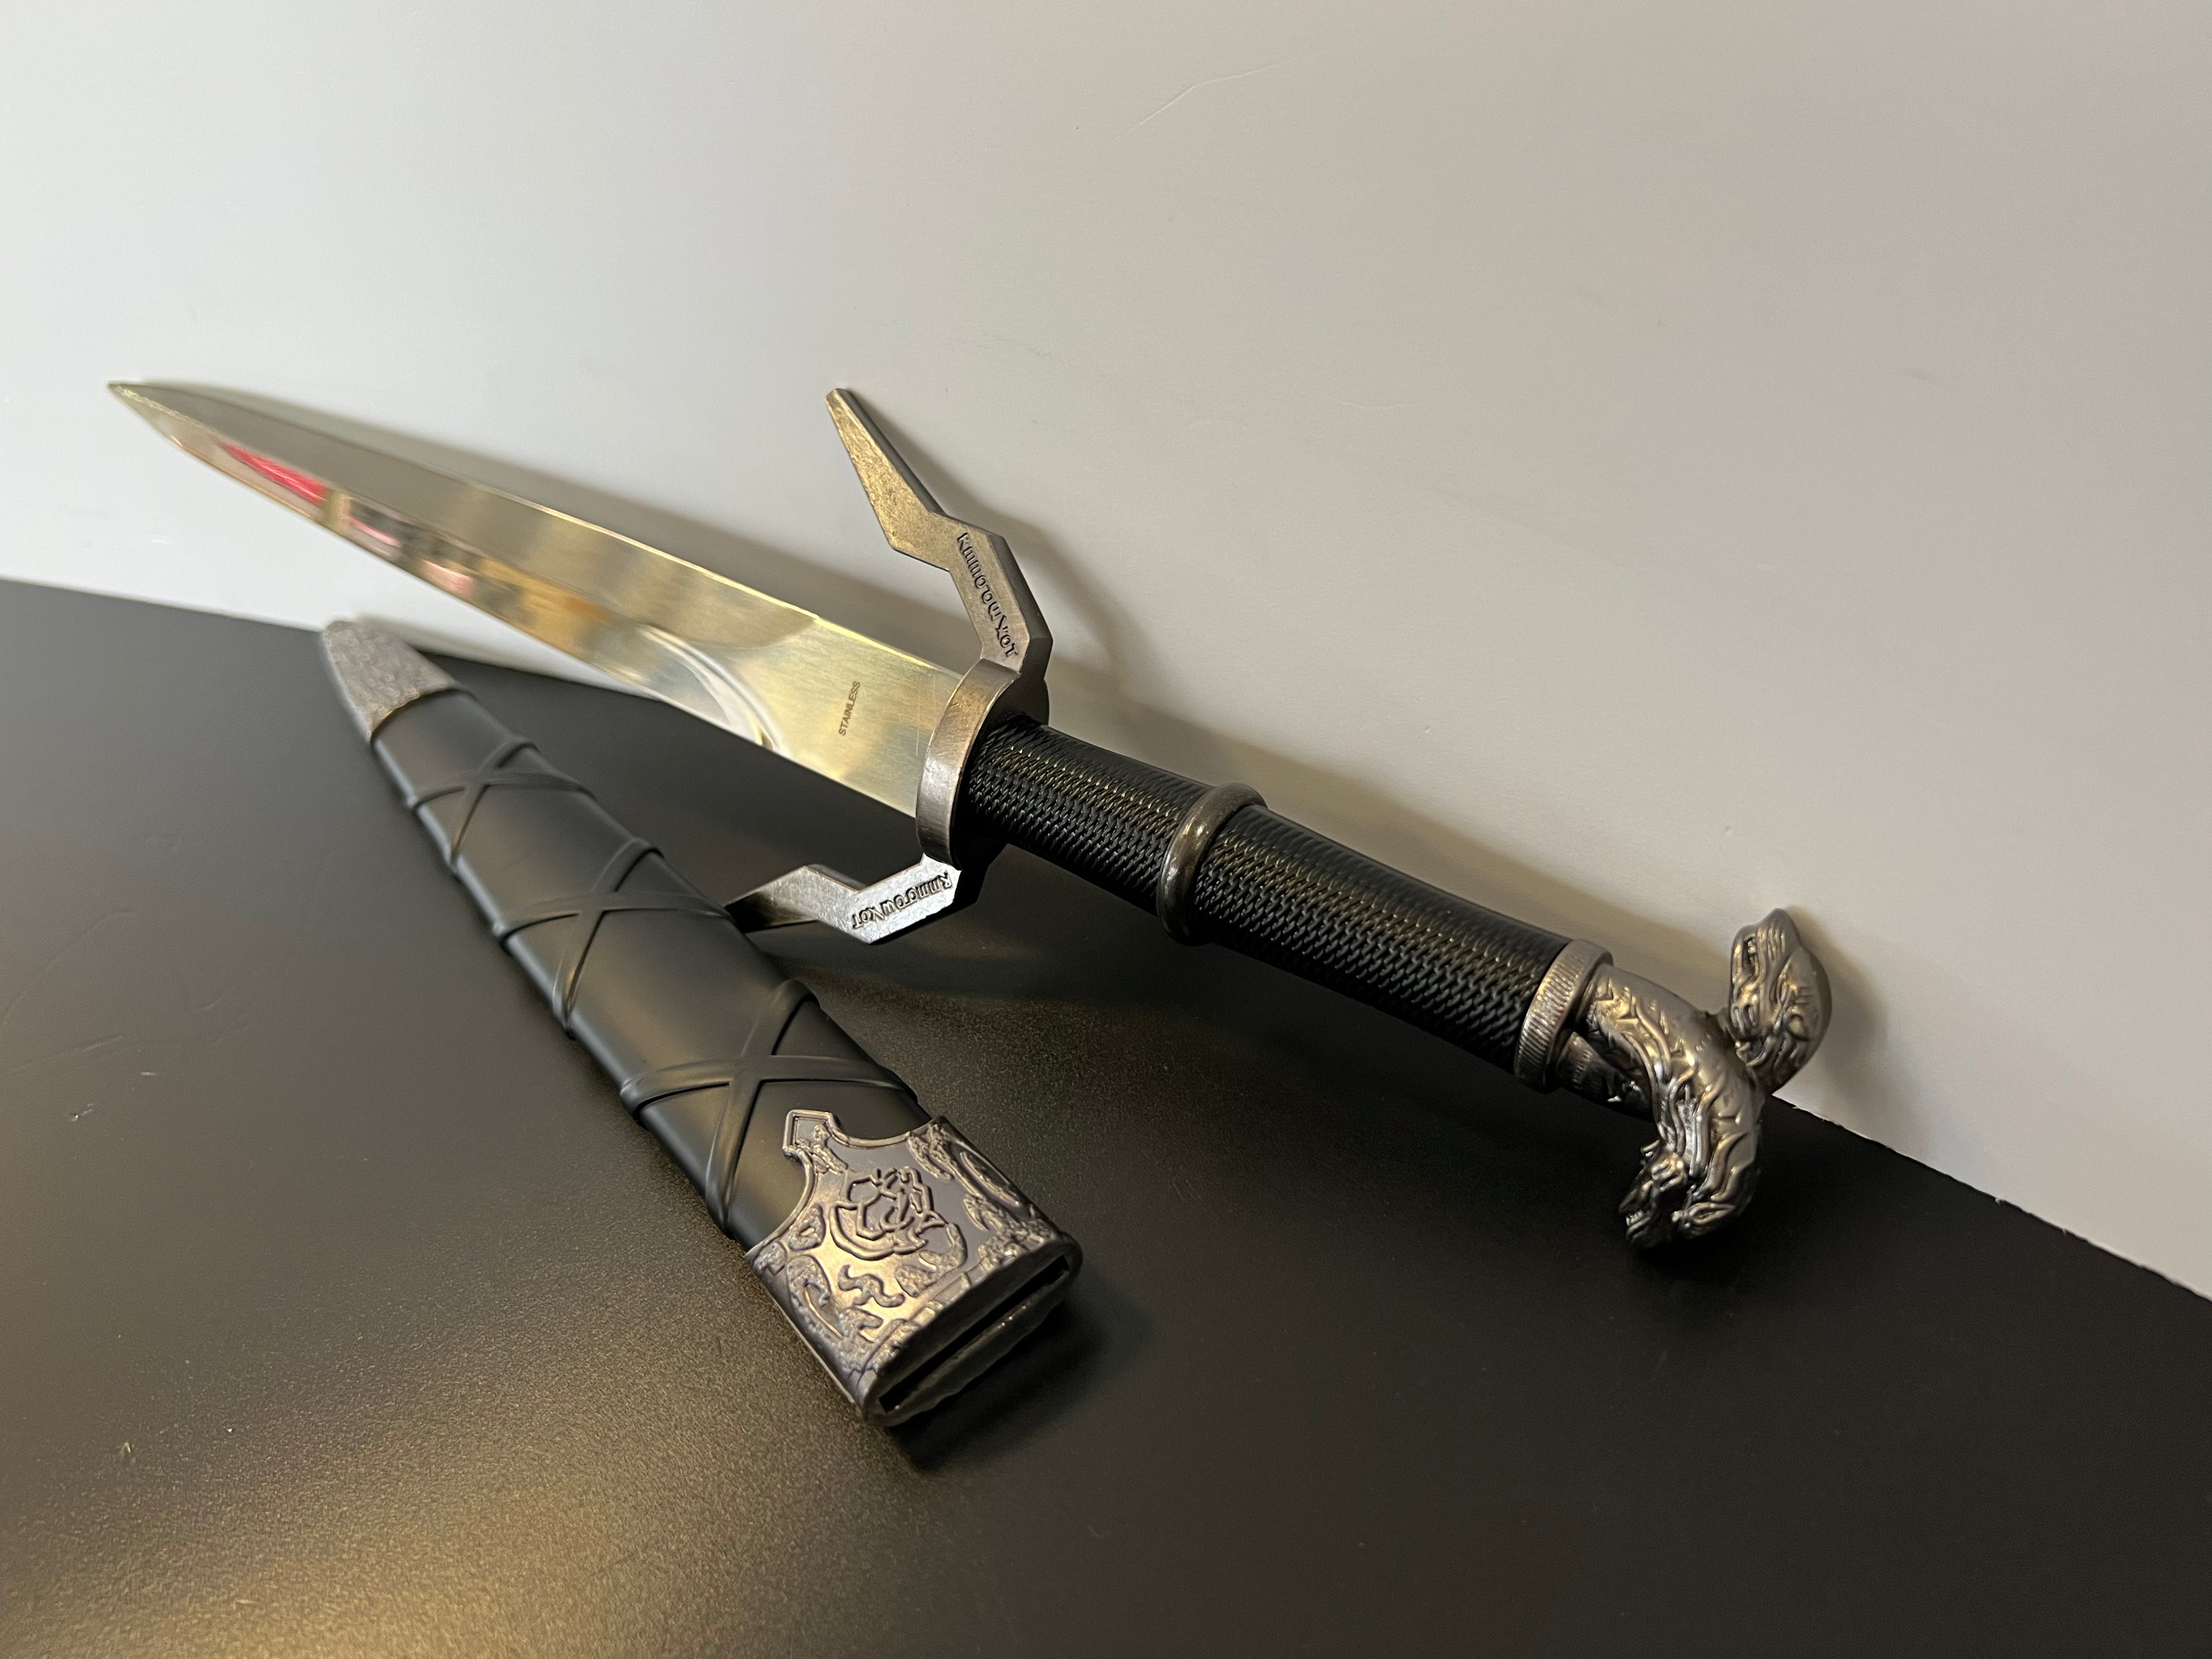 Geralt of Rivia two-handed sword dagger - The Witcher